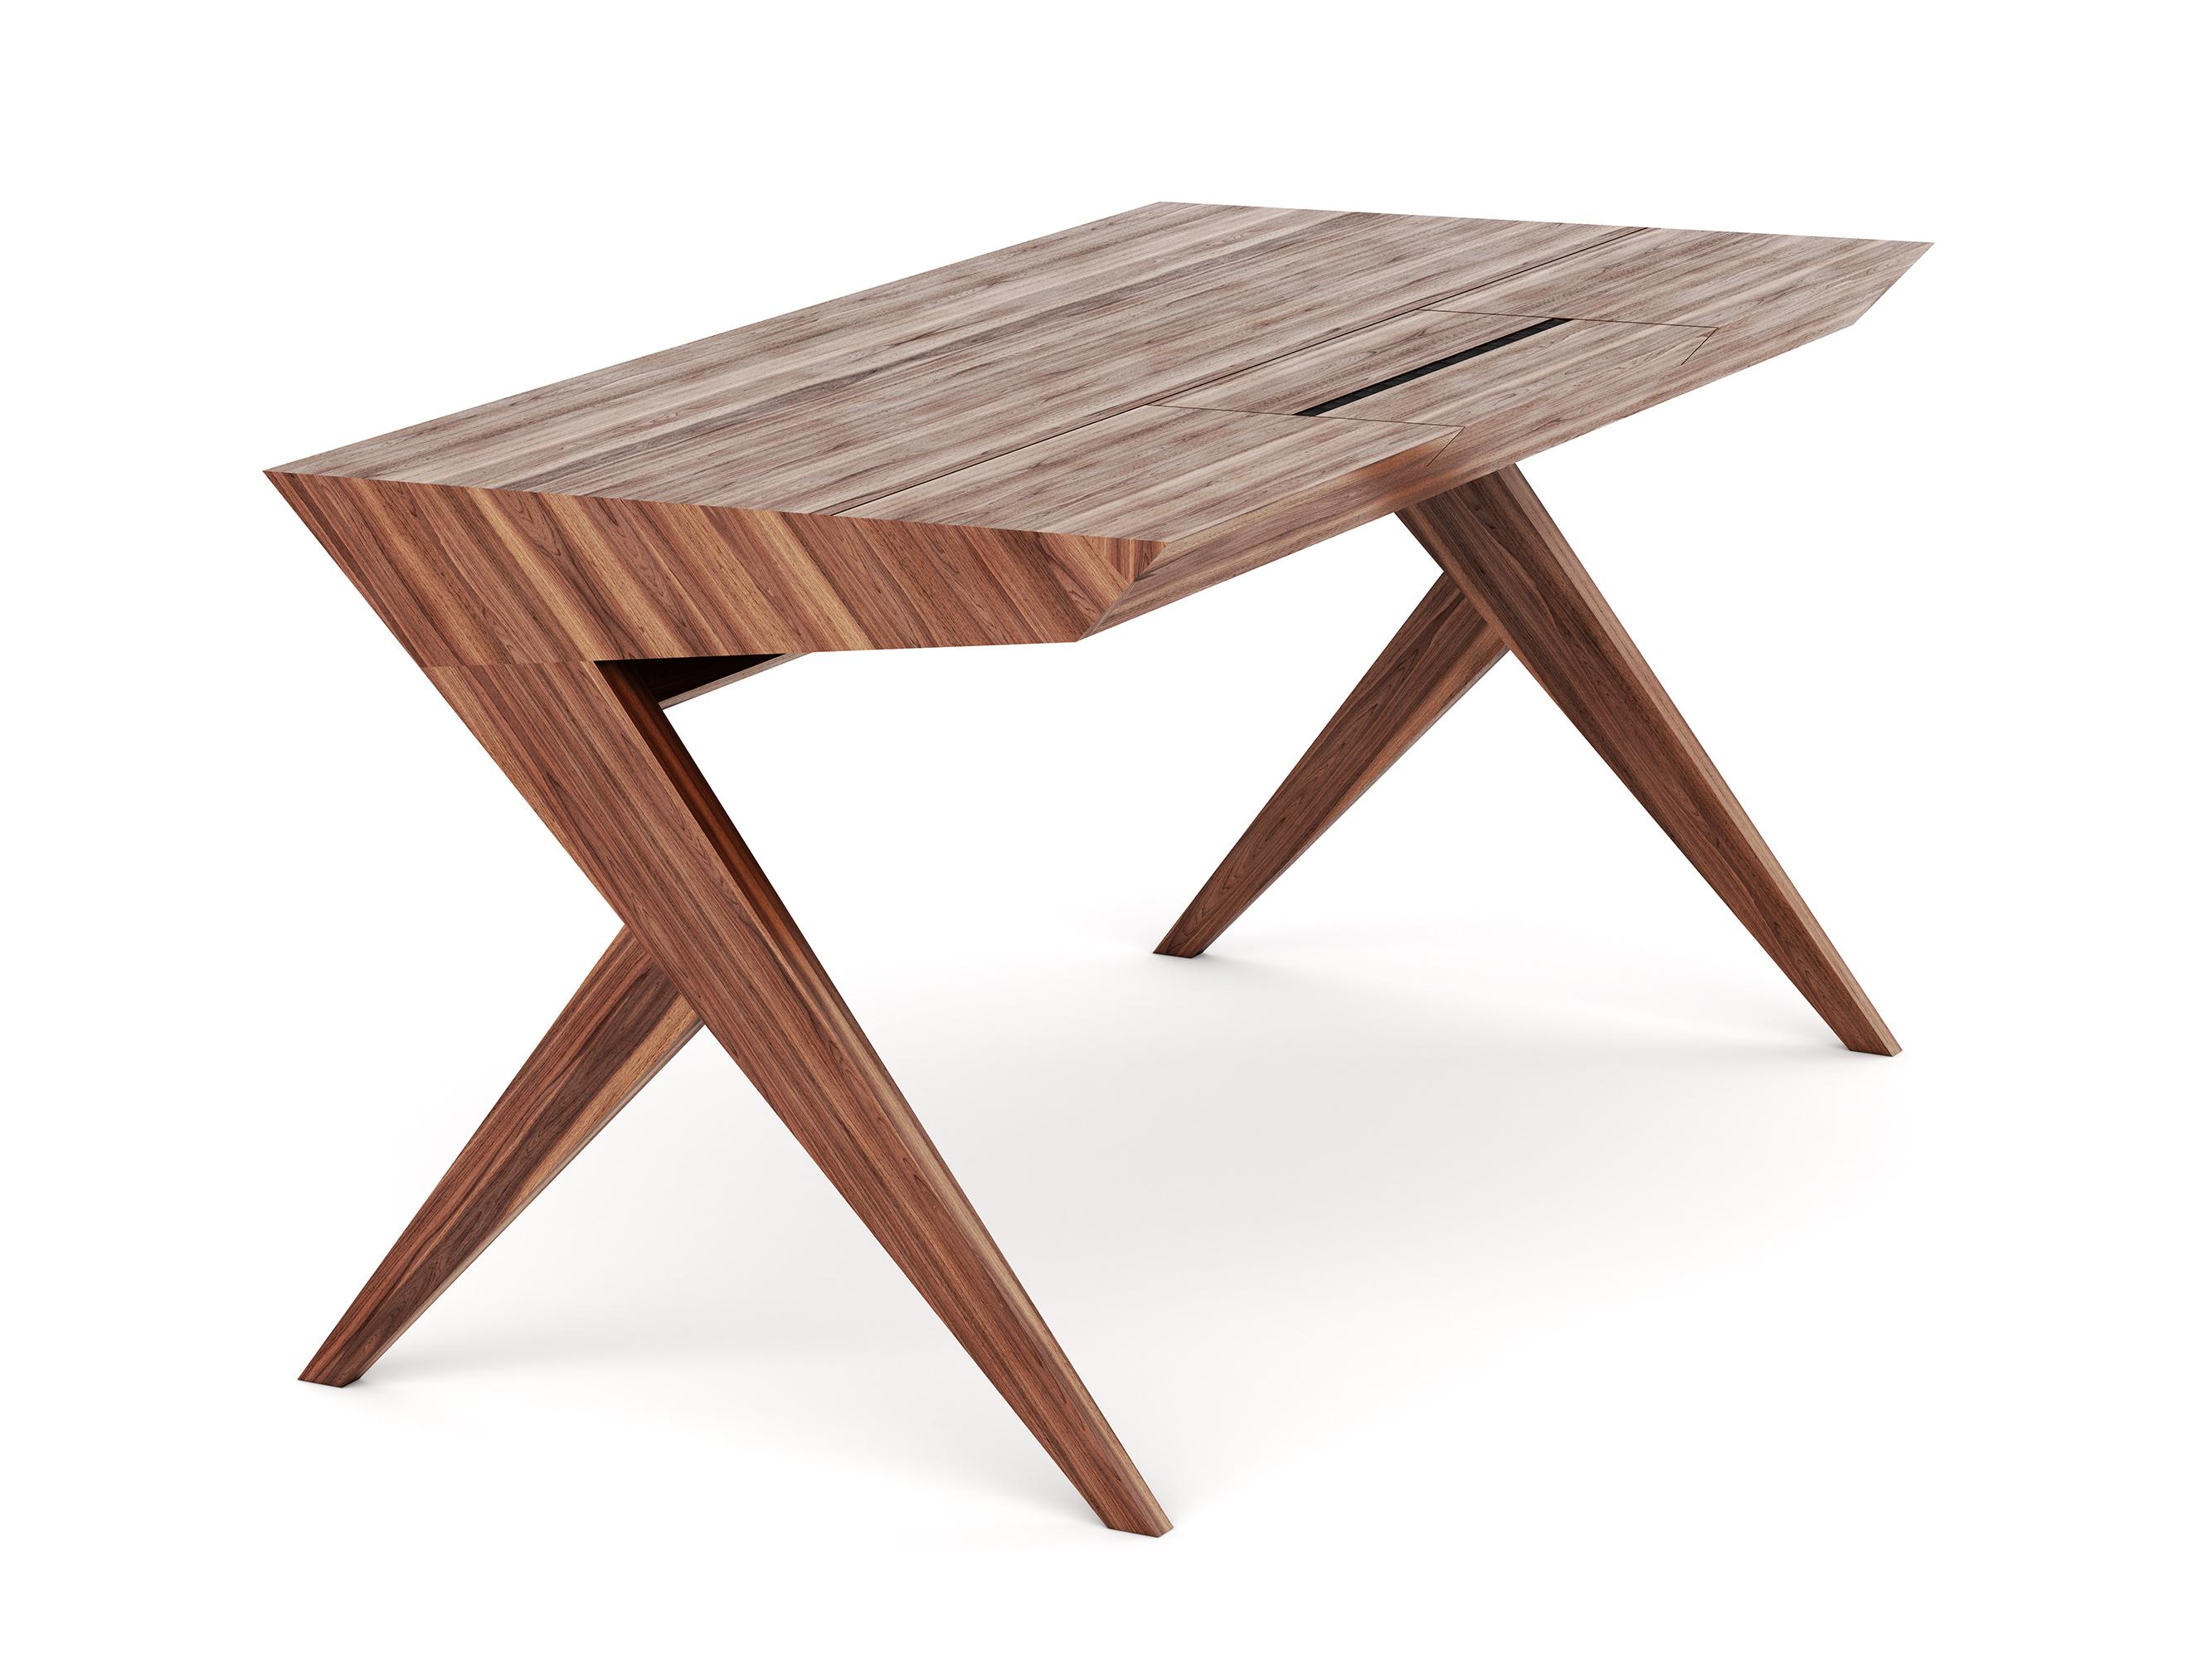 Locust desk designed by Alexandre Caldas to AROUNDtheTREE was created to be a memento to those, who by simple liberation, just have a go on doing things! The intrepid and the insatiable, who look forward to that blank page.

For those who have a